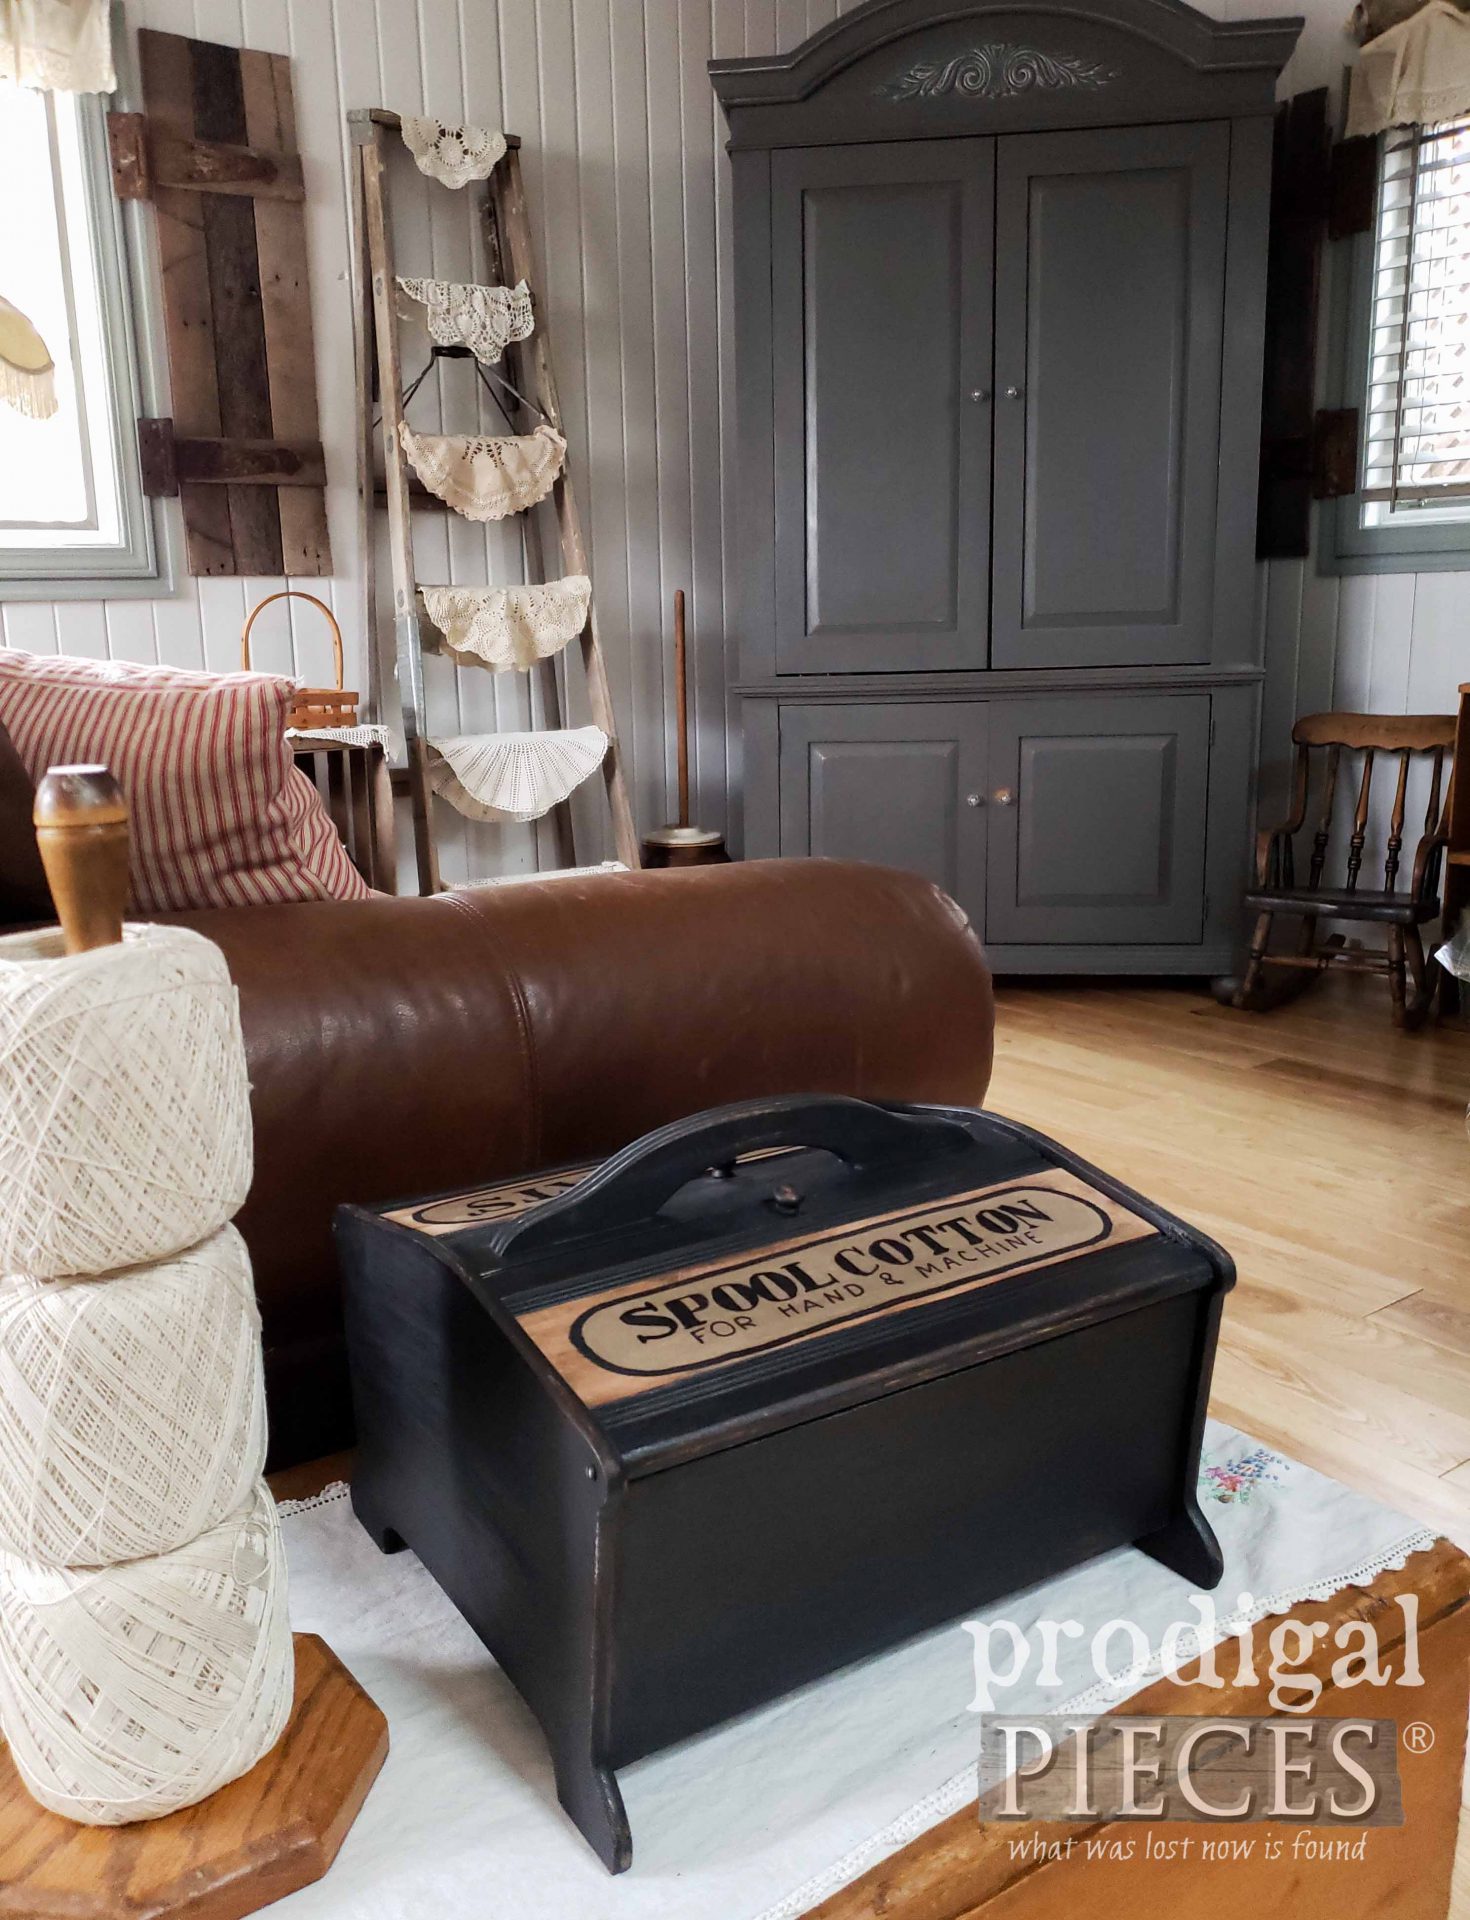 Farmhouse Style Remote Control Holder created from a vintage sewing box by Larissa of Prodigal Pieces | prodigalpieces.com #prodigalpieces #farmhouse #diy #home #storage #homedecor